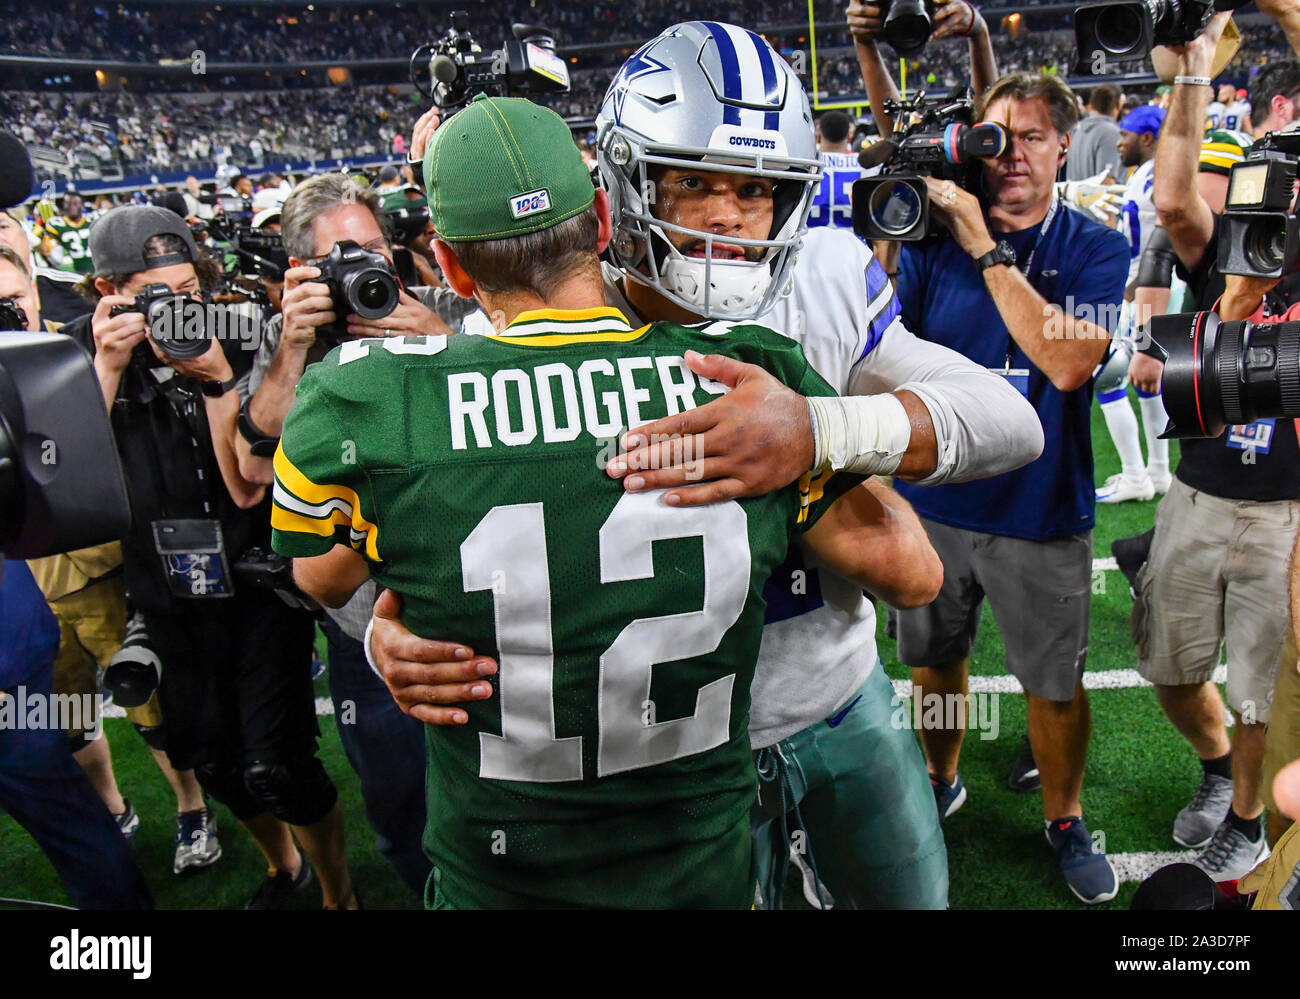 Oct 6, 2019: Dallas Cowboys quarterback Dak Prescott #4 hugs Green Bay  Packers quarterback Aaron Rodgers #12 after an NFL game between the Green  Bay Packers and the Dallas Cowboys at AT&T